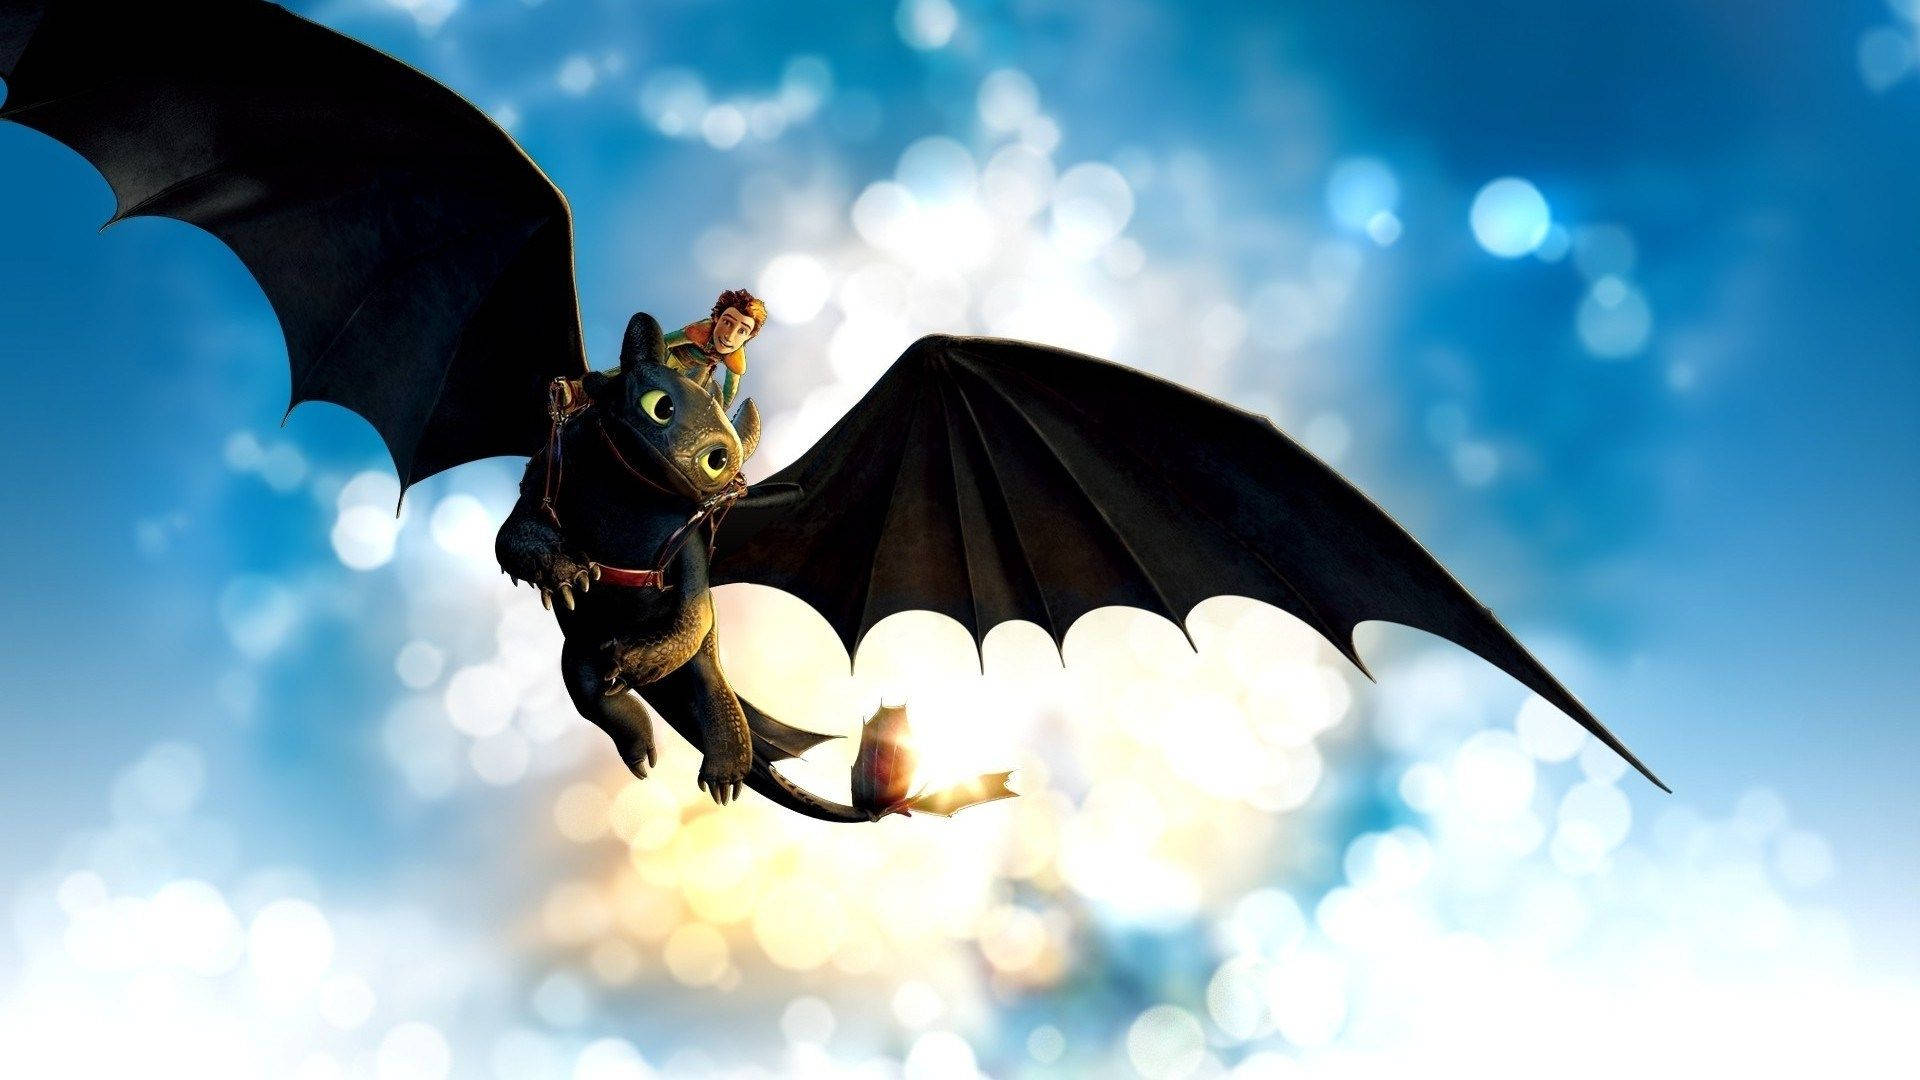 How To Train Your Dragon Hiccup and Toothless flying in the sky wallpaper.